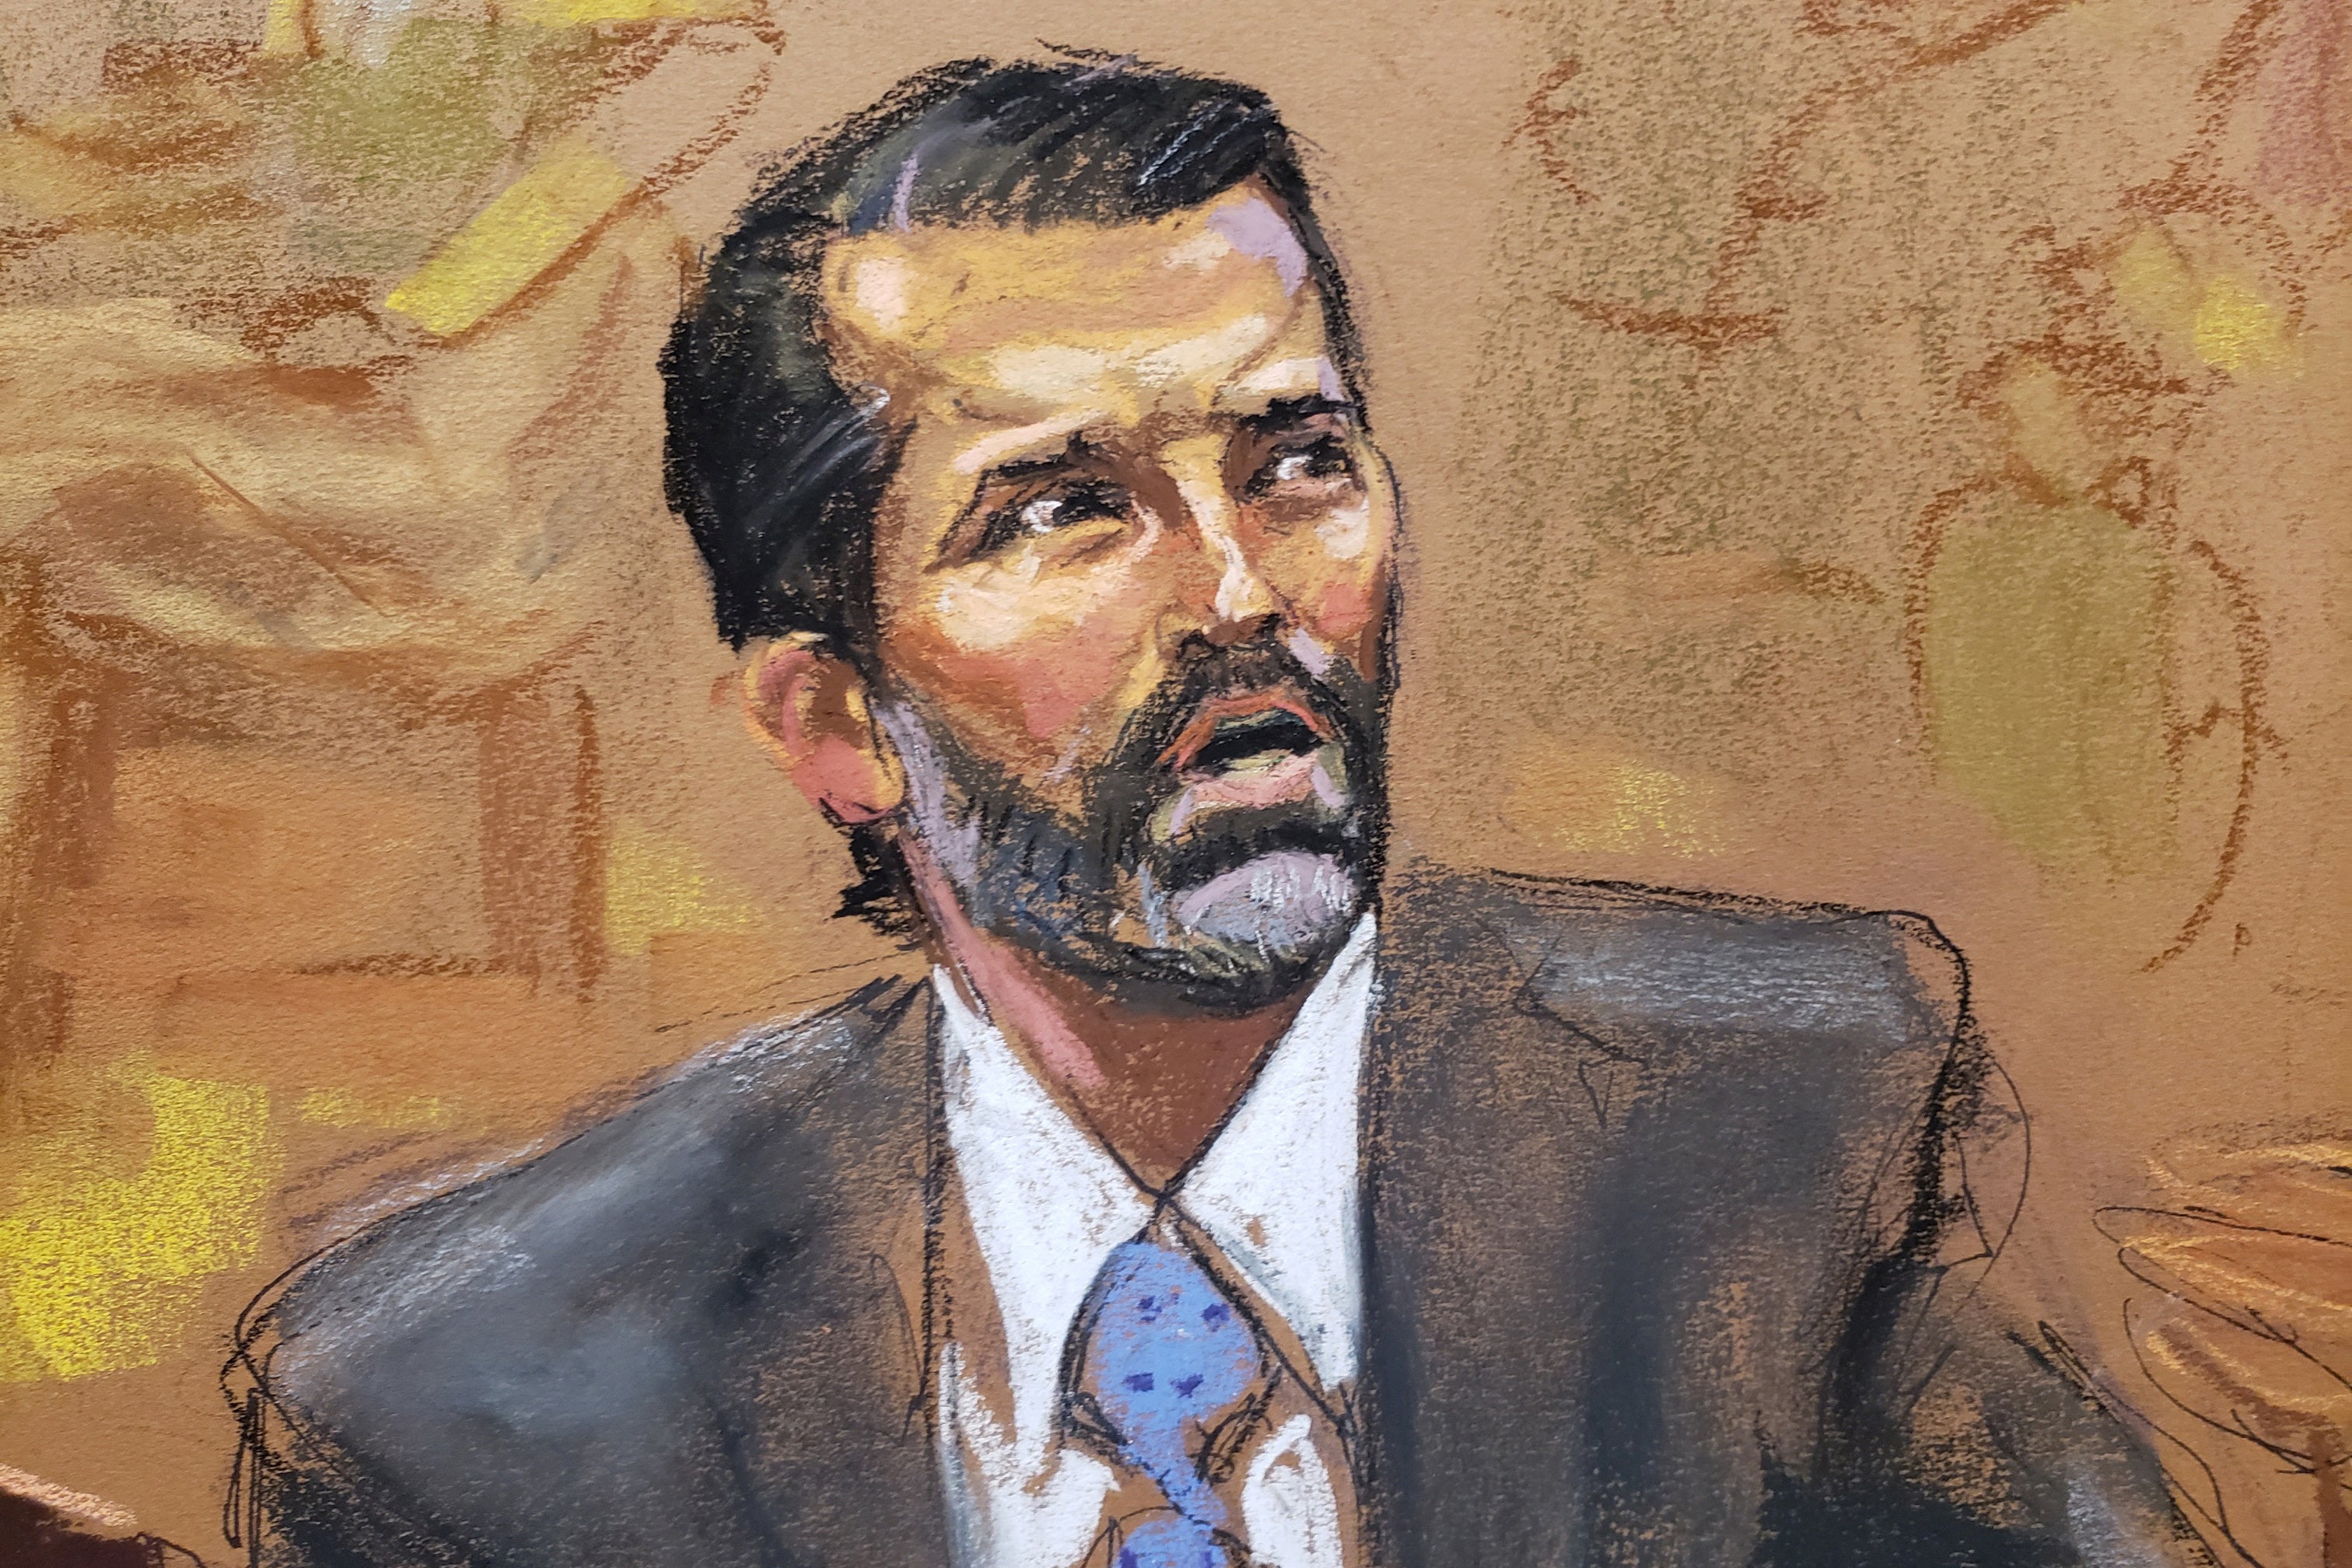 A courtroom sketch depicts Donald Trump Jr testifying in his second appearance at the fraud trial